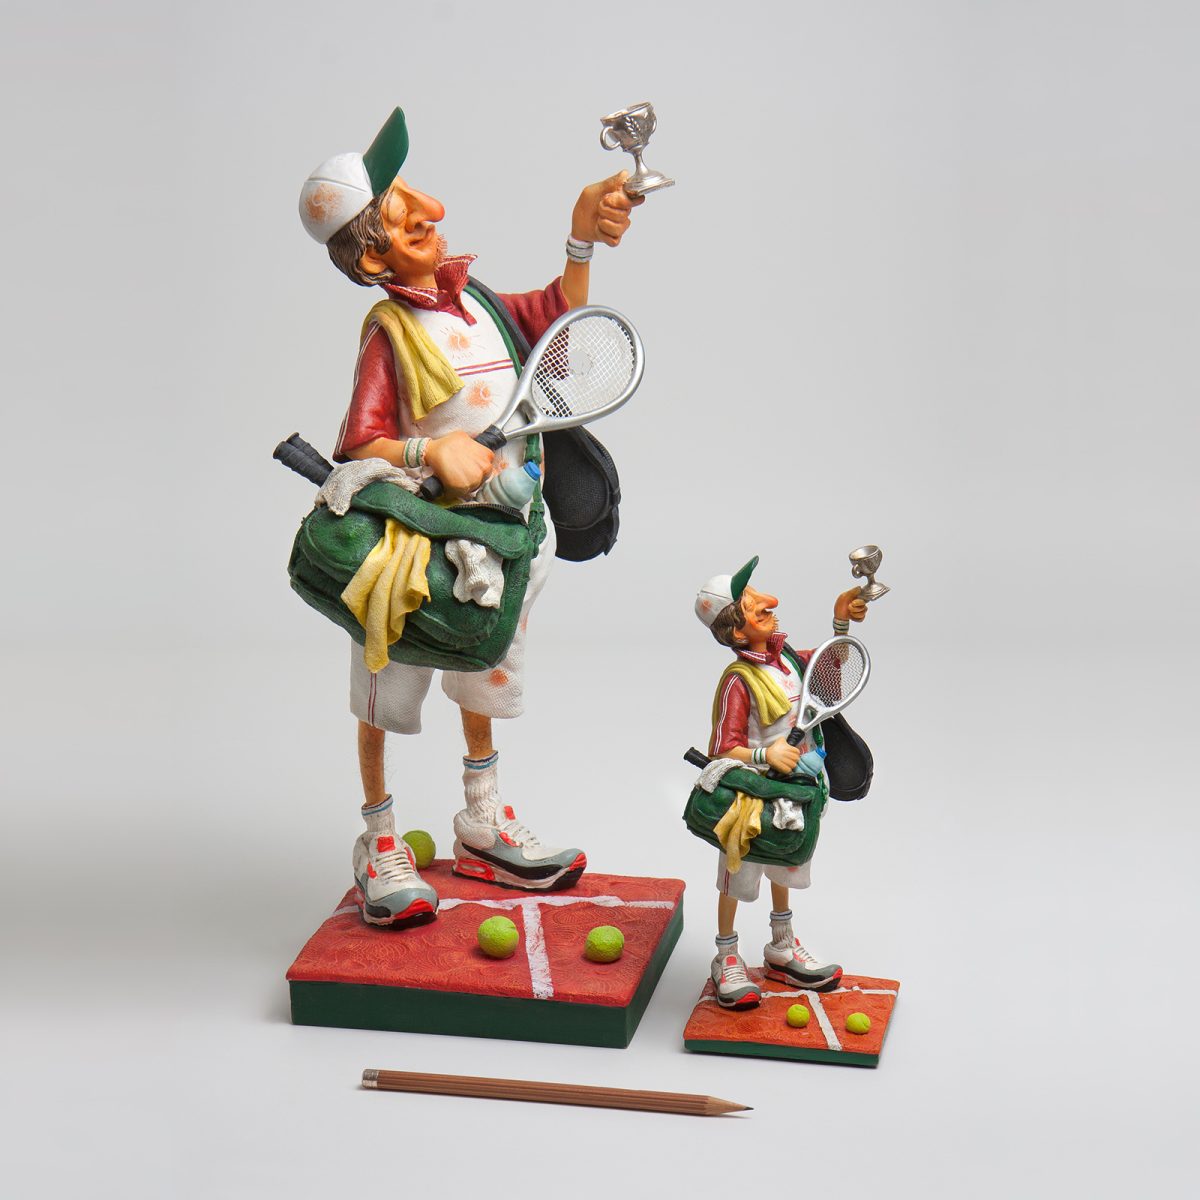 Guillermo Forchino Tennis Player Miniature Figurines Gifts